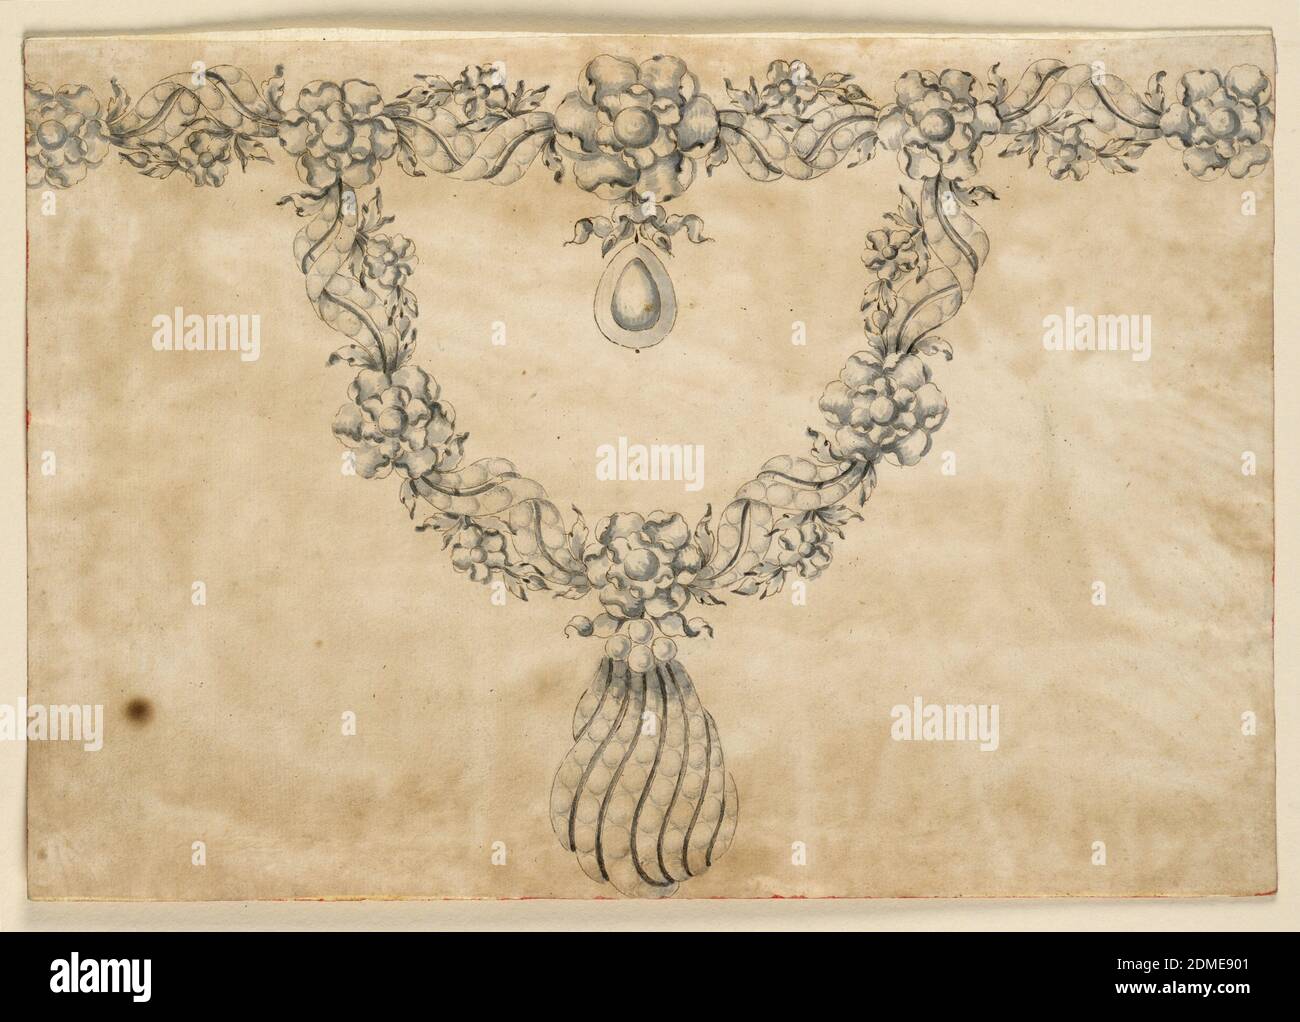 Design for a Necklace, Pen and sepia ink, brush and gray watercolor on paper, Jewelry design for a necklace with a horizontal band at top and an attached curving band below. The bands made of interlaced chain consisting of a scroll of ribbons and a garland with rosettes of leaves at the joining of the two parts; additional rosettes evenly spaced throughout. Hanging from the center of the horizontal band's largest rosette is a knotted ribbon that holds a drop. Hanging from the center of the curving band's central rosette is a teardrop-shaped shell, composed of ribbons with diamonds or pearls Stock Photo